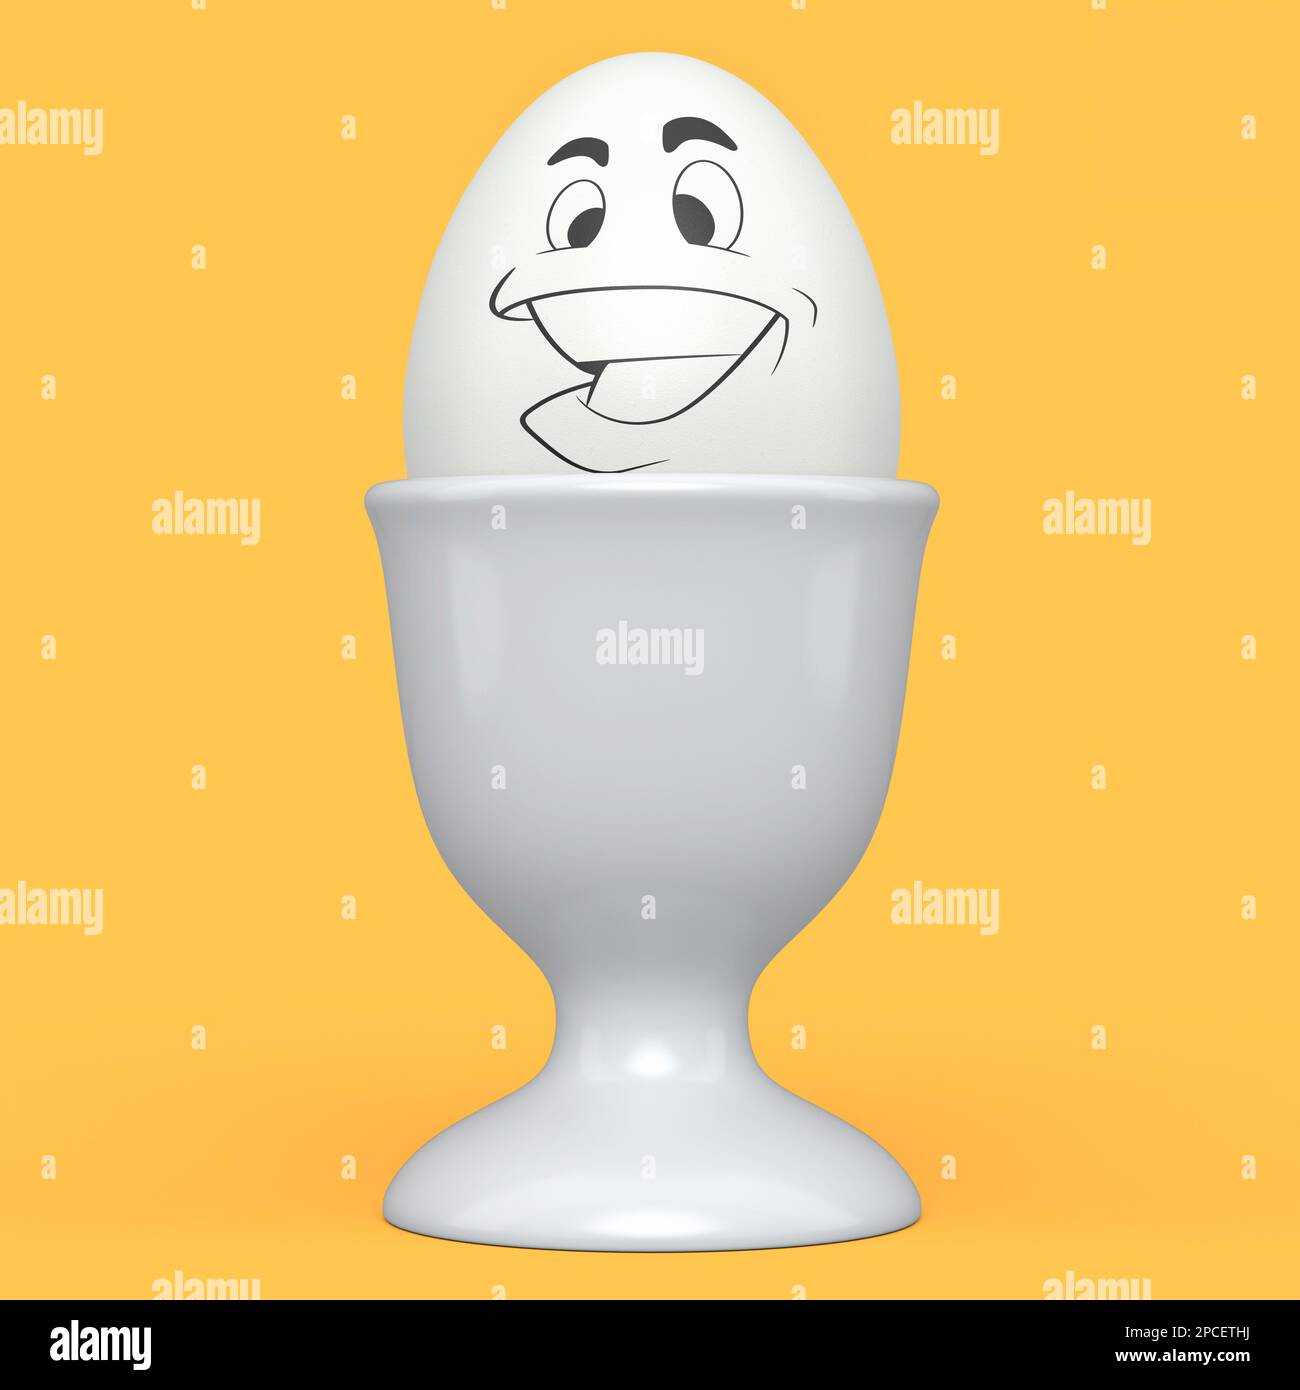 https://c8.alamy.com/comp/2PCETHJ/farm-white-painted-egg-with-expressions-and-funny-face-in-ceramic-egg-cup-for-breakfast-on-yellow-background-3d-render-of-easter-eggs-template-design-2PCETHJ.jpg